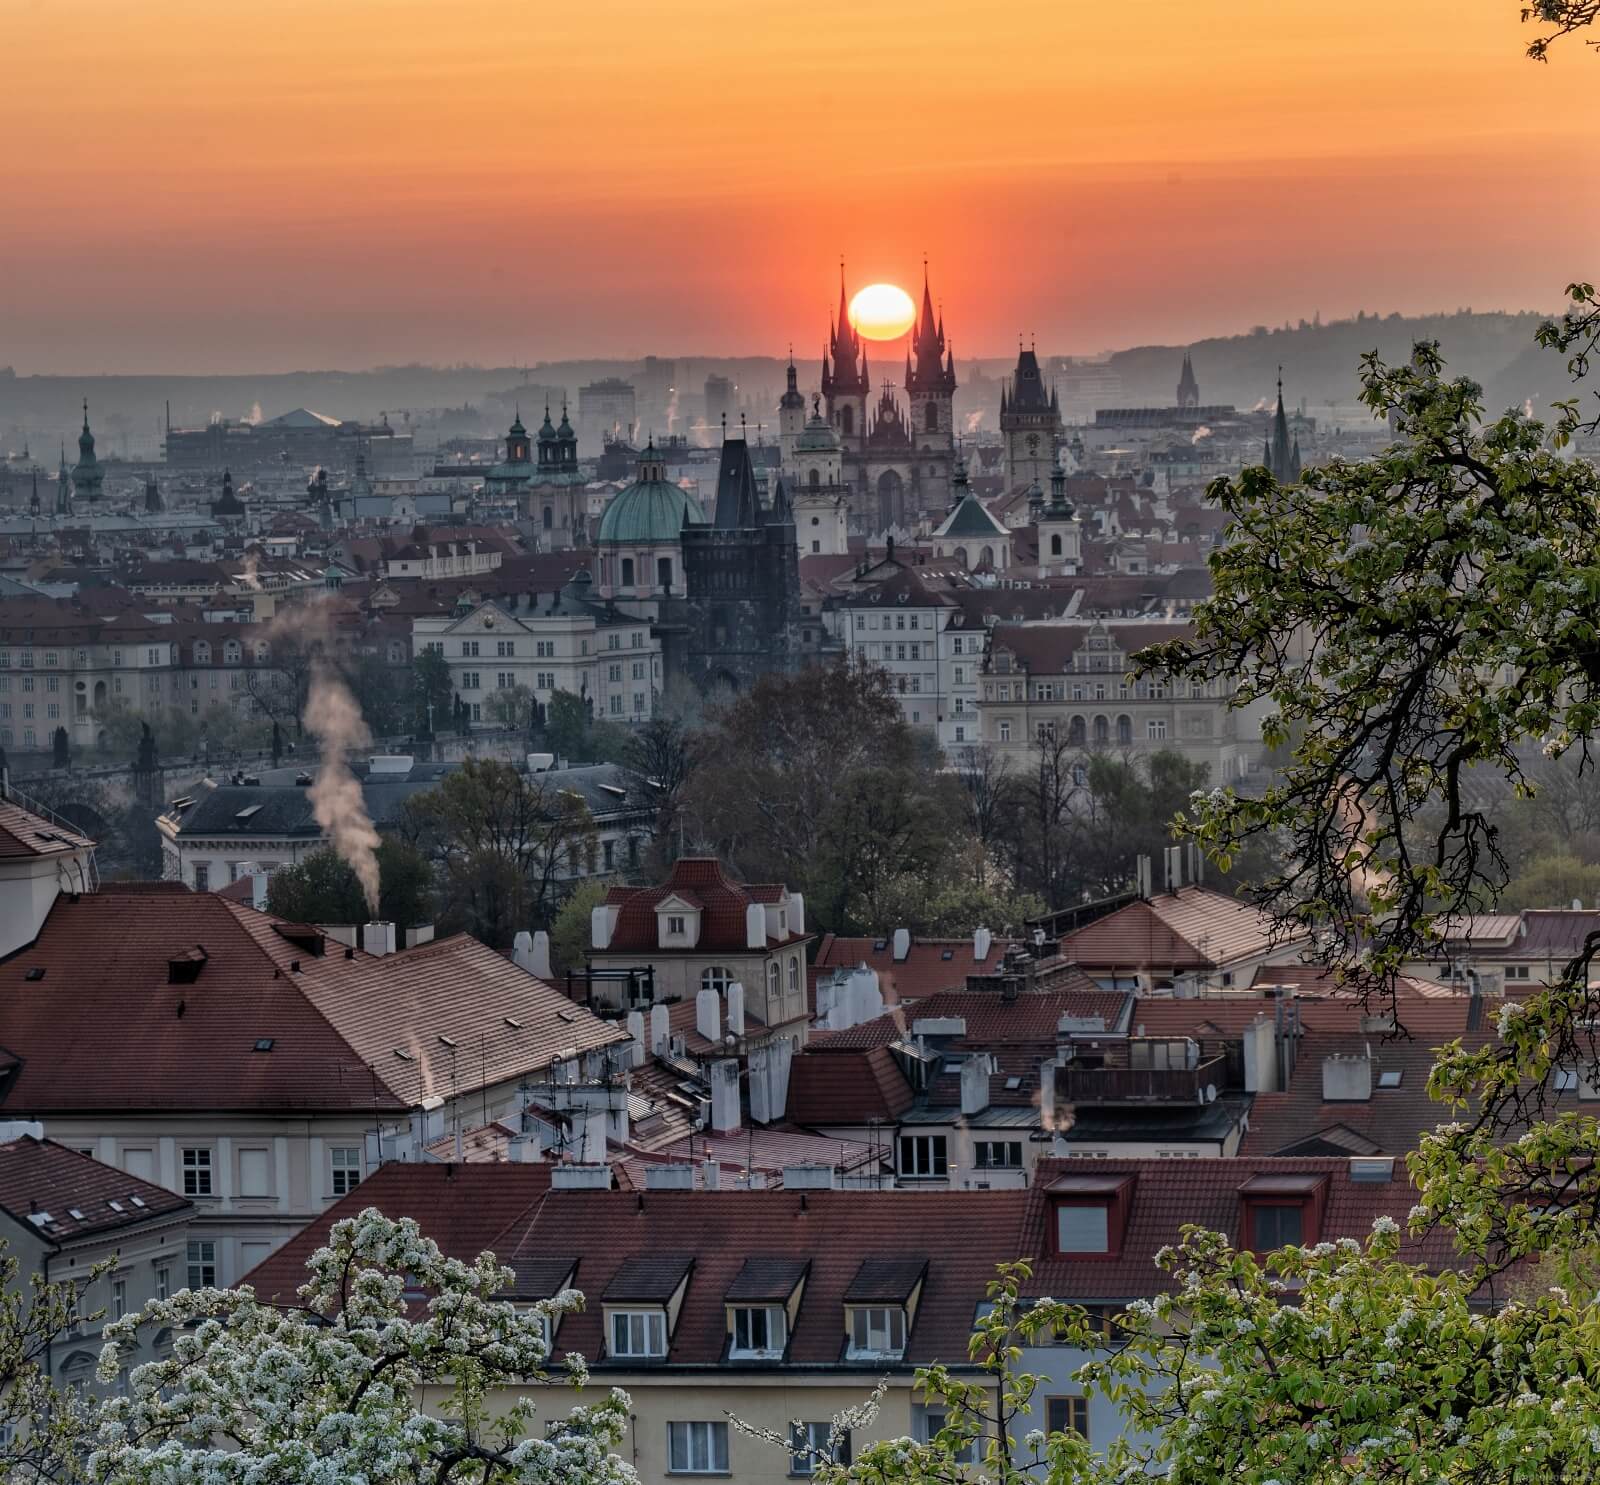 Image of Views from Petřín hill by Oliver Sherratt